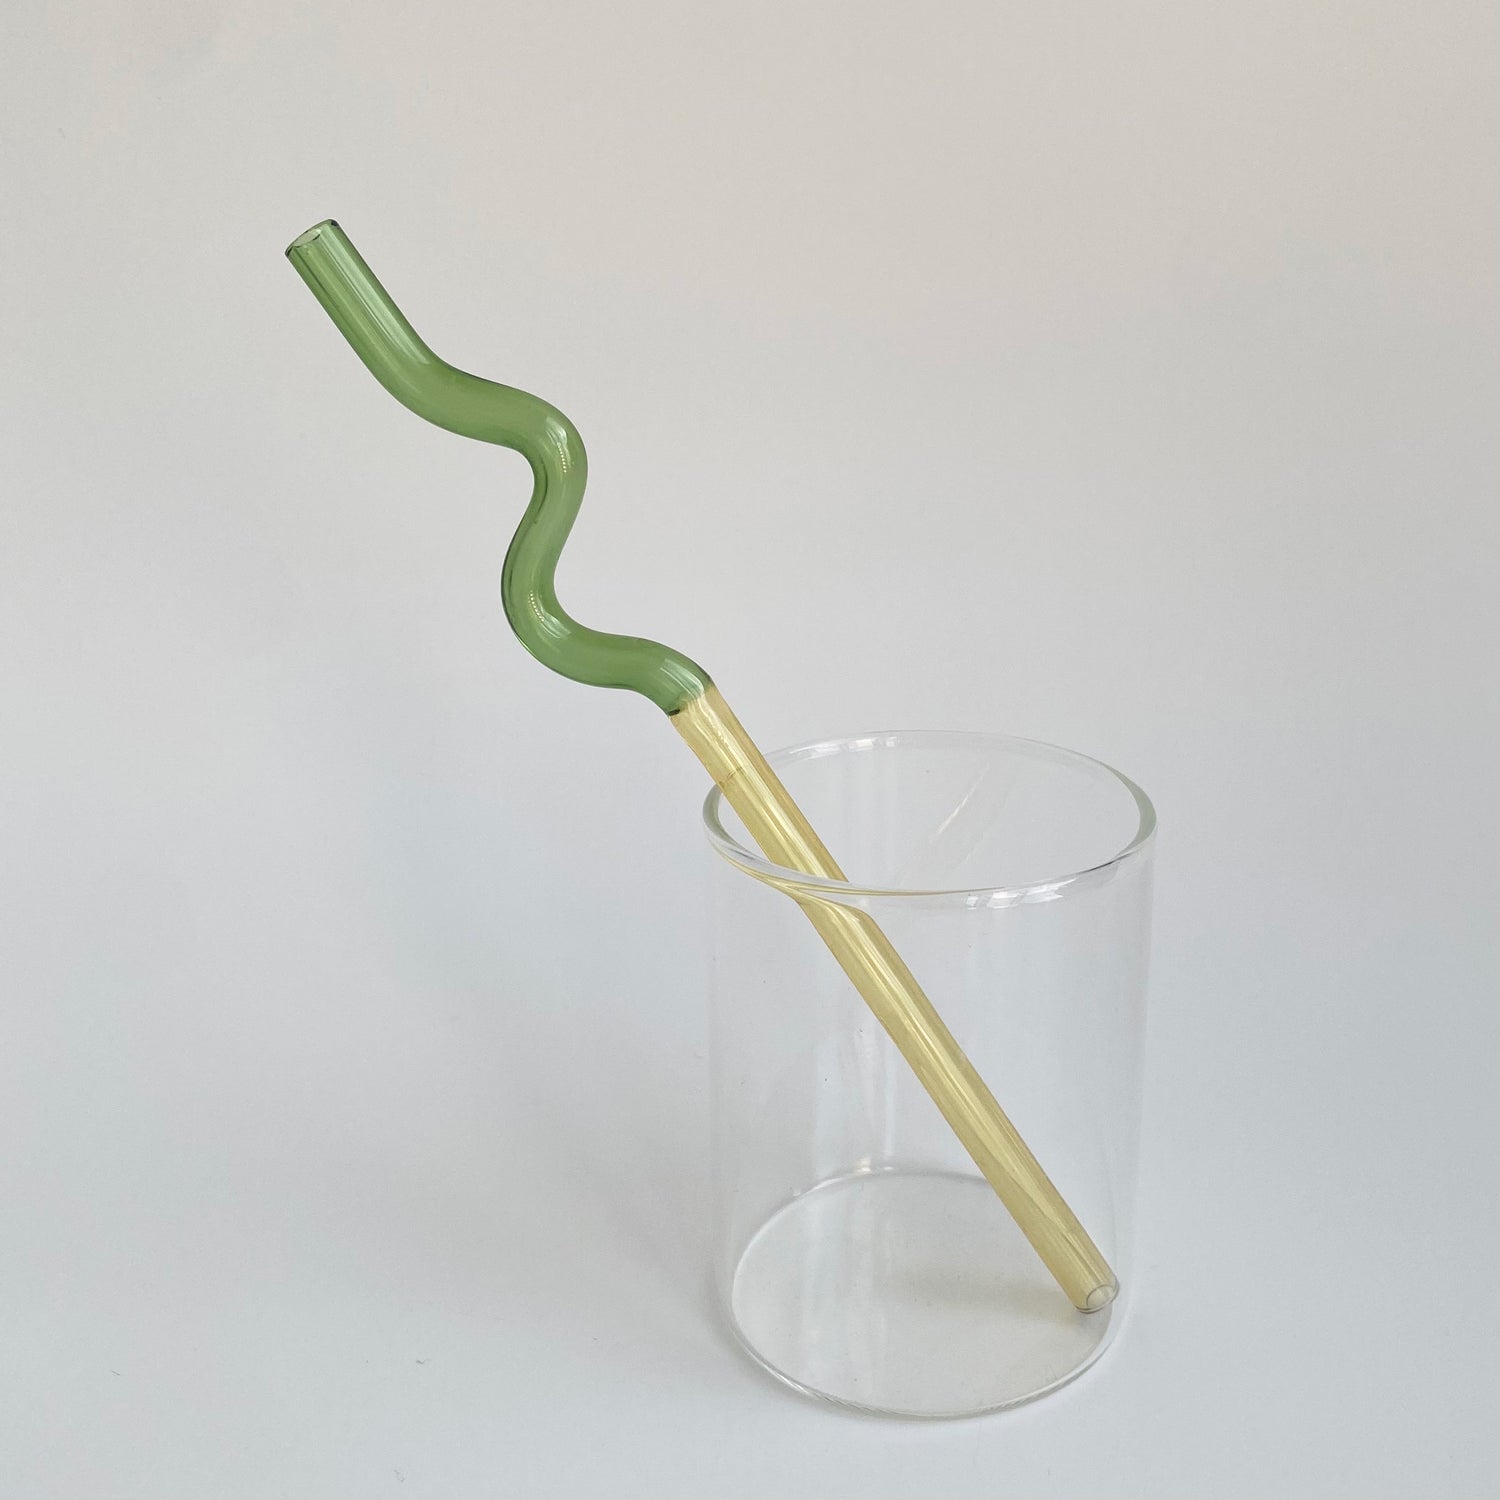 Colorful Spiral & Wavy Glass Straw in yellow/green